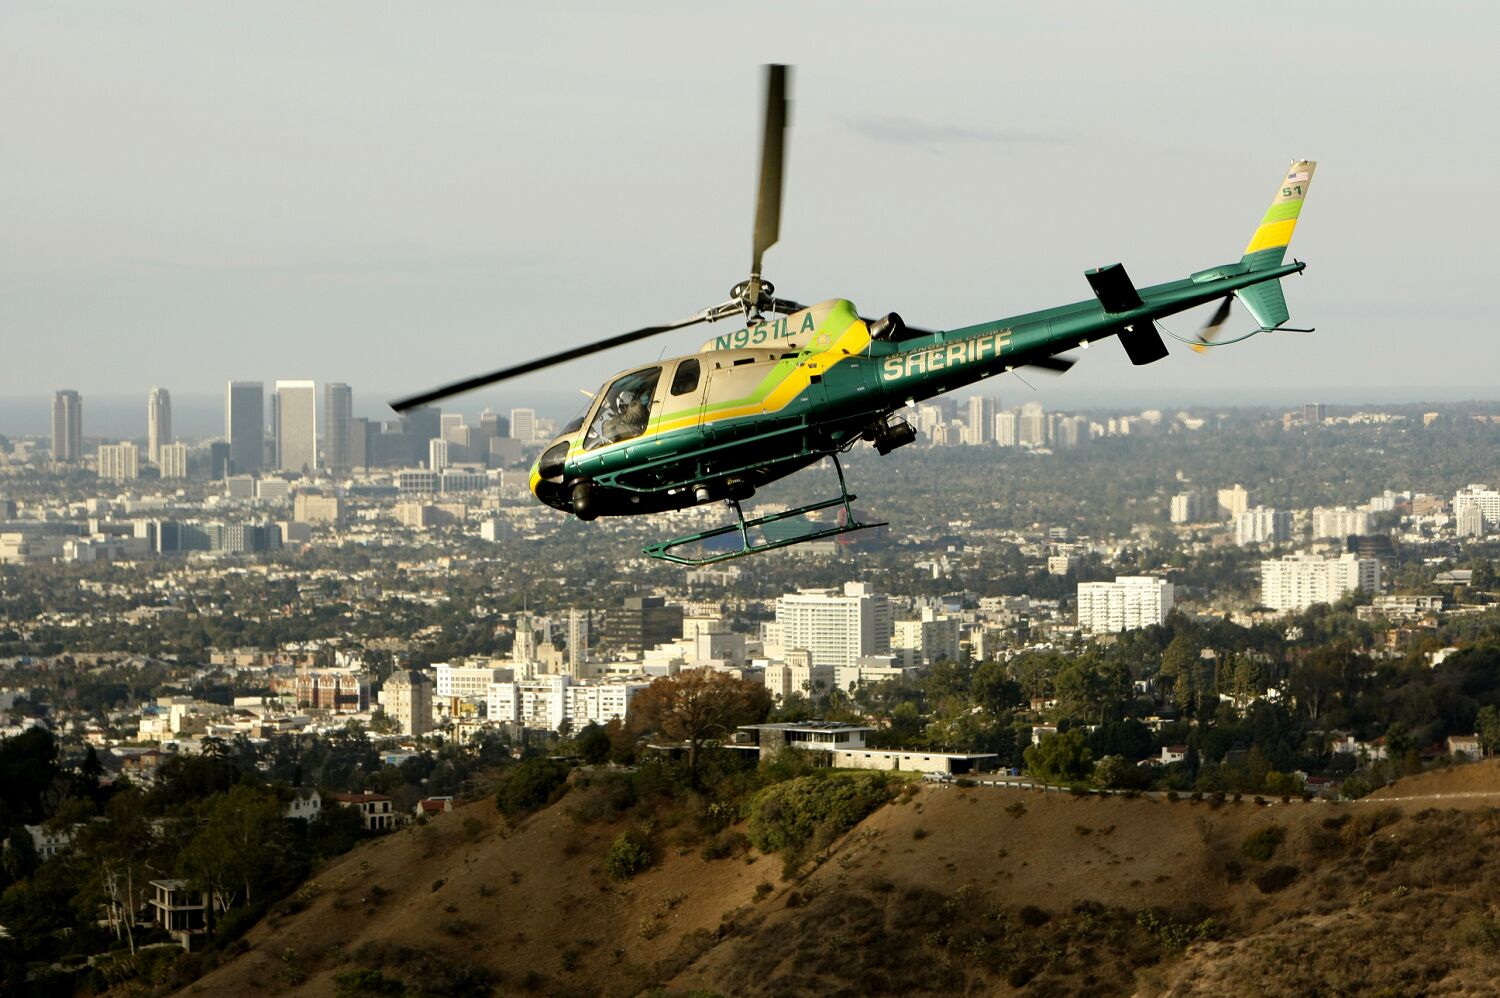 Sheriff's helicopters buzz lowest over Black homes, they say, and they're out to prove it